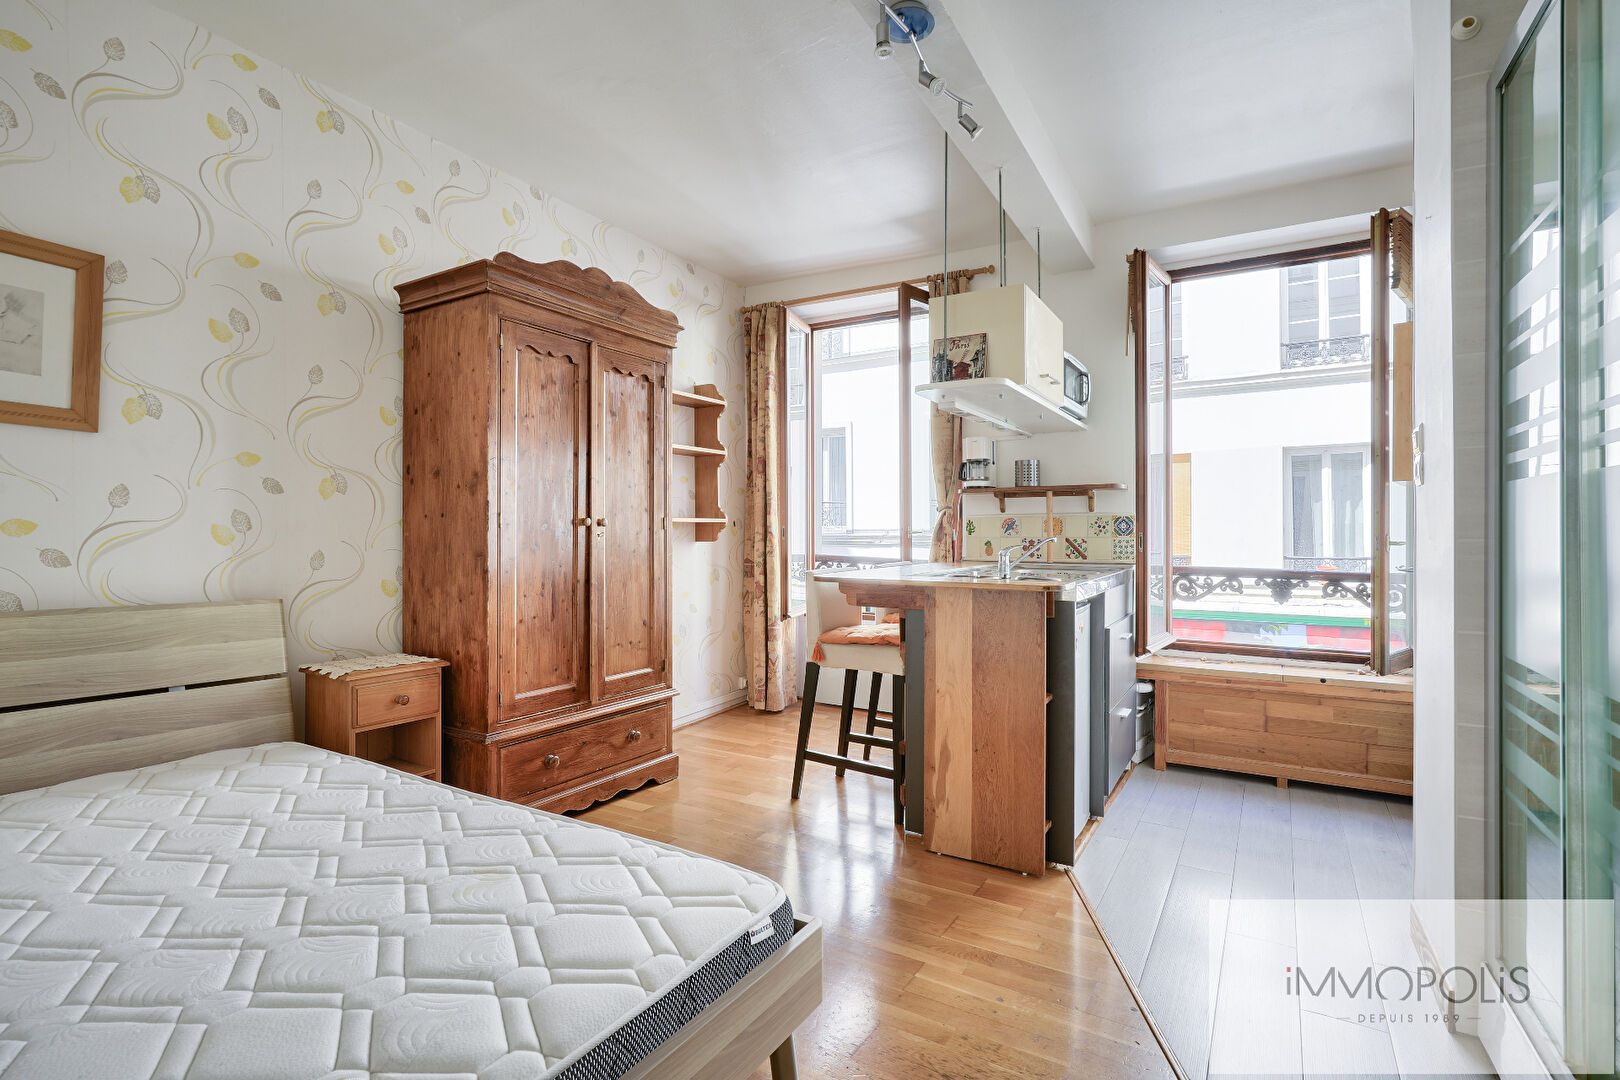 Beautiful studio in good condition well placed in Montmartre with a good DPE: e 1